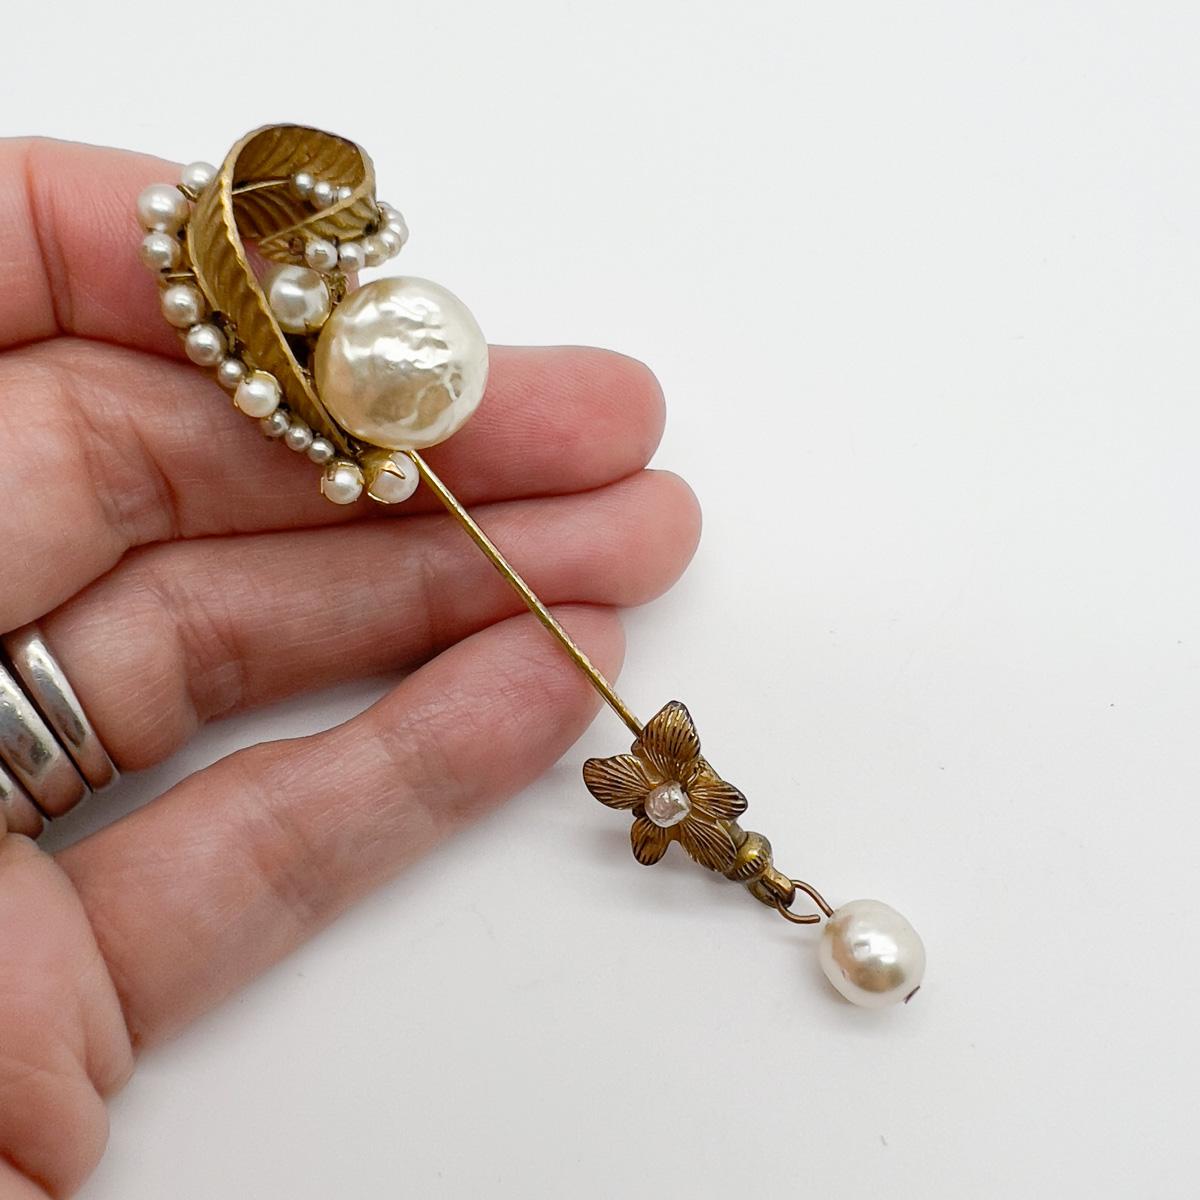 A delightful and rare Vintage Miriam Haskell Pearl Droplet Pin crafted in the 1940s, nearly 100 years ago. The attention to detail in this pin is exquisite and signifies the craftmanship at play in Haskell's work. A rare and ultra chic way to